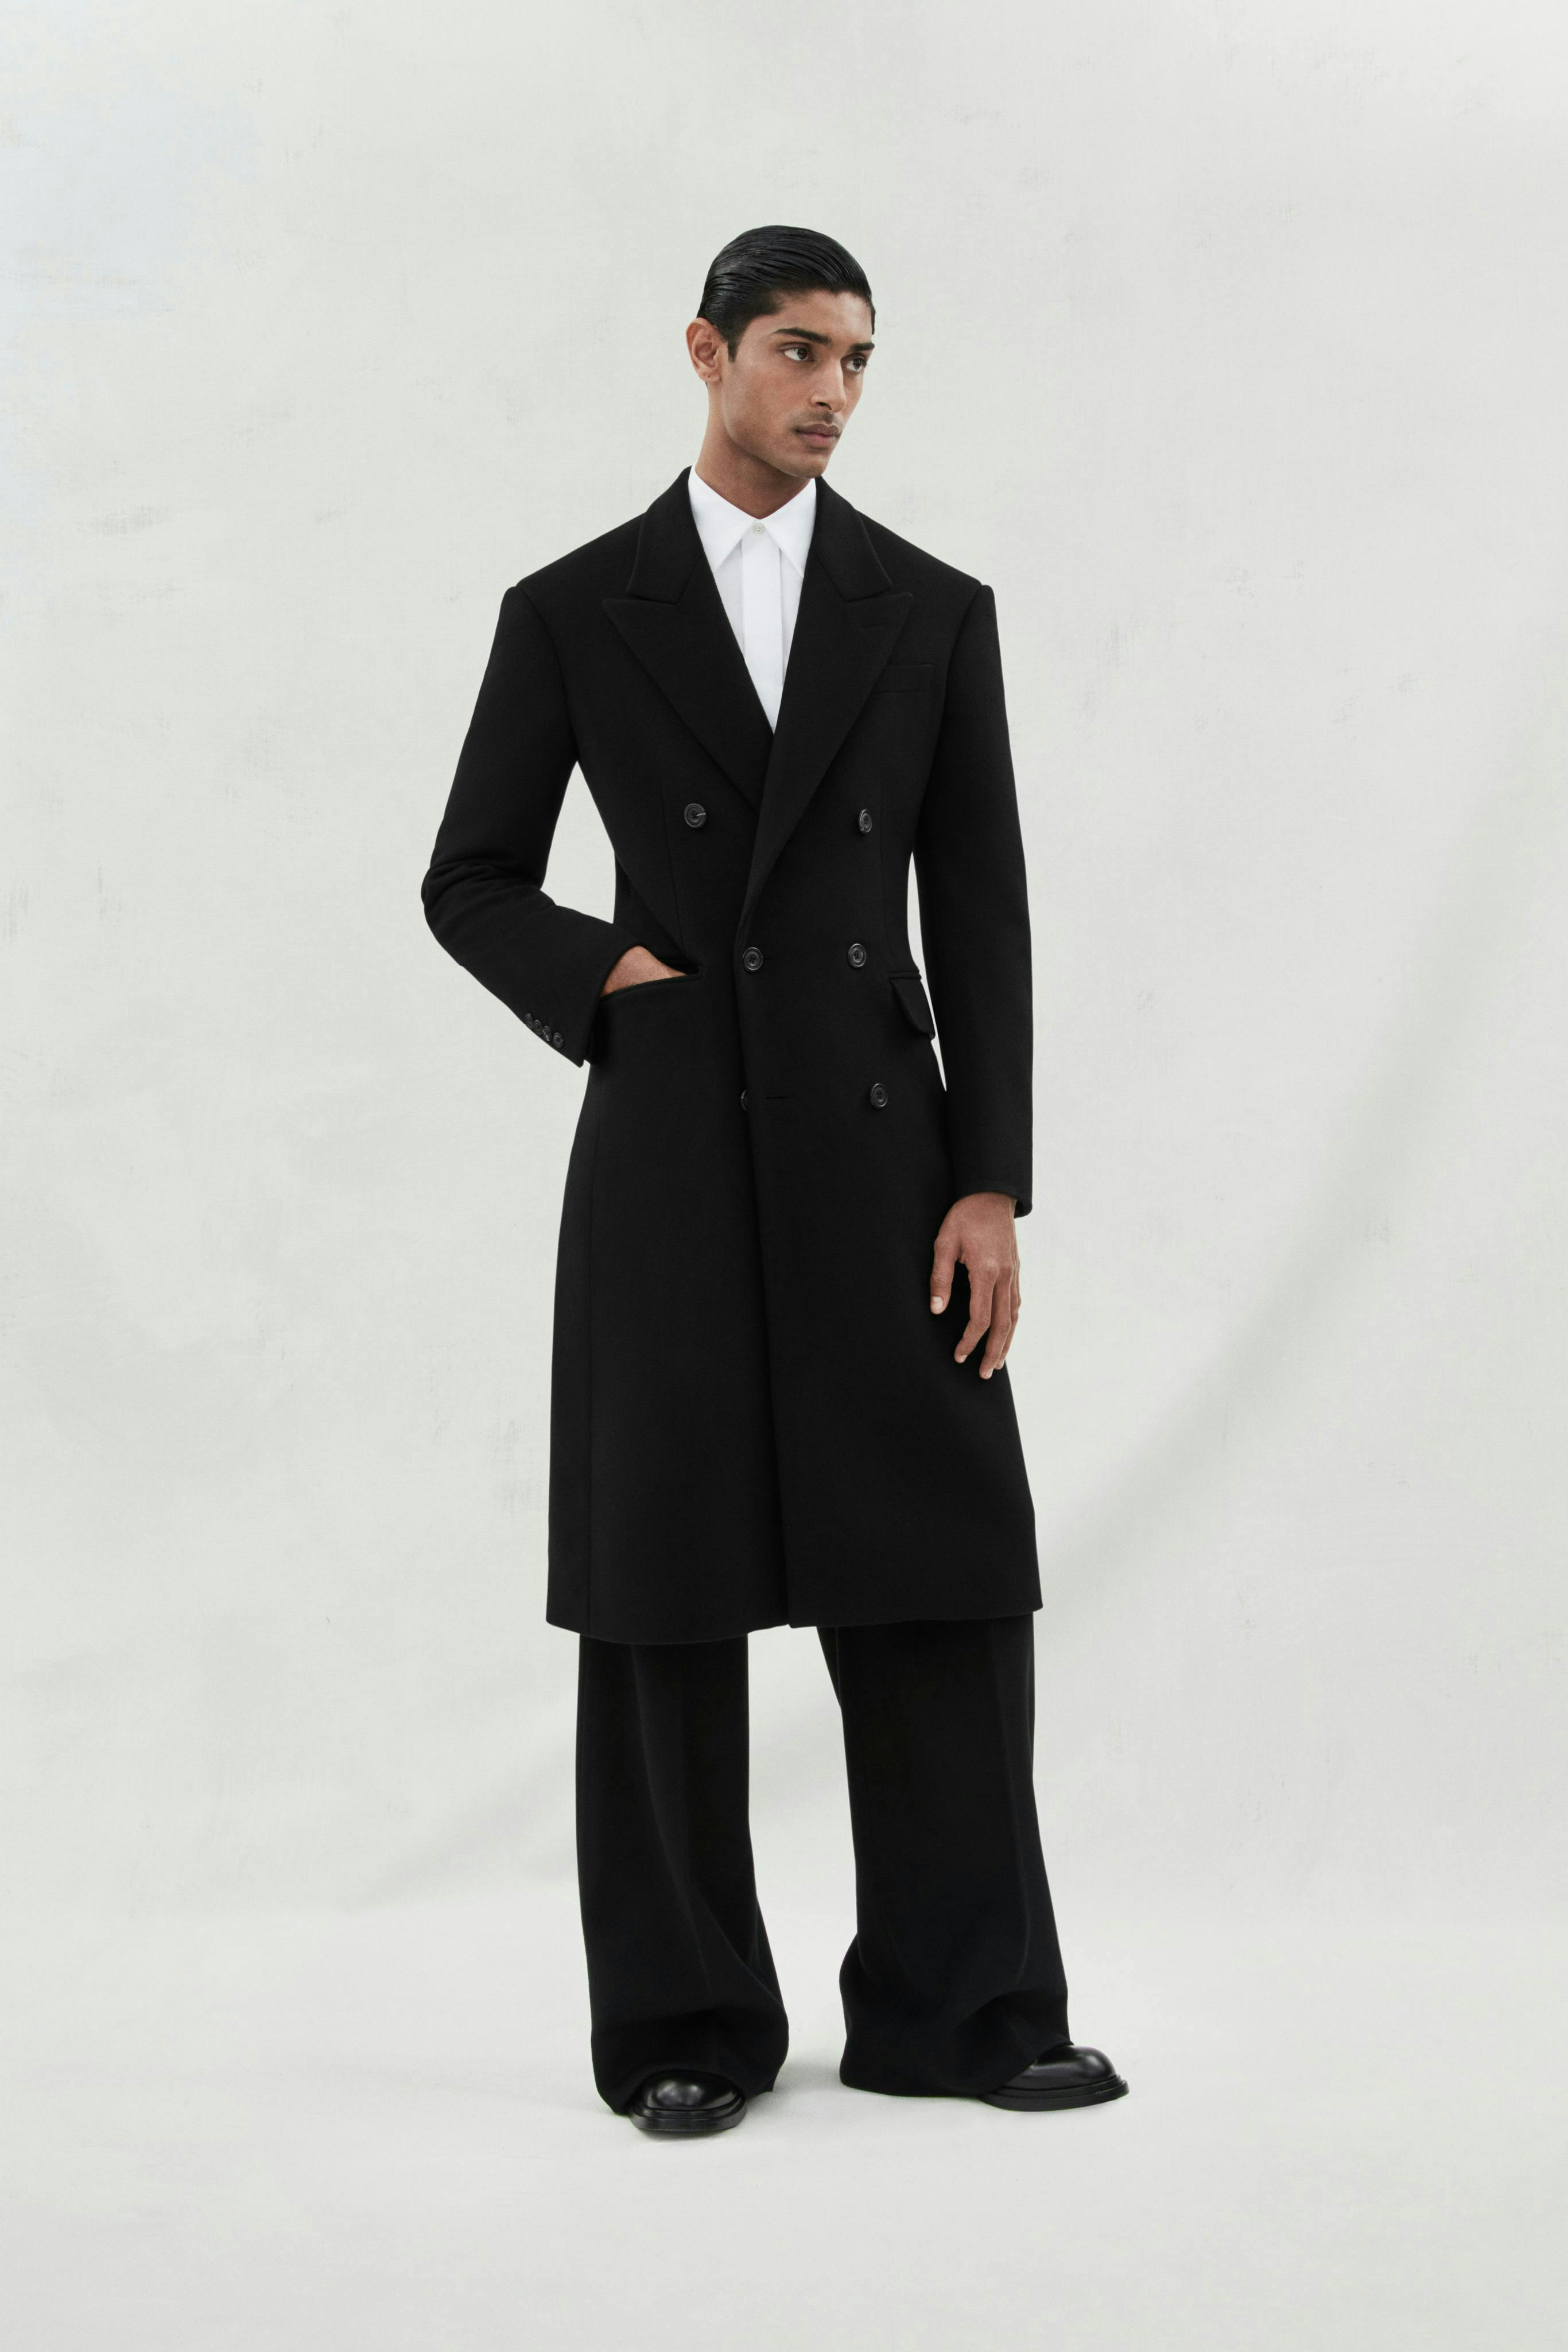 coat clothing overcoat person man adult male suit formal wear